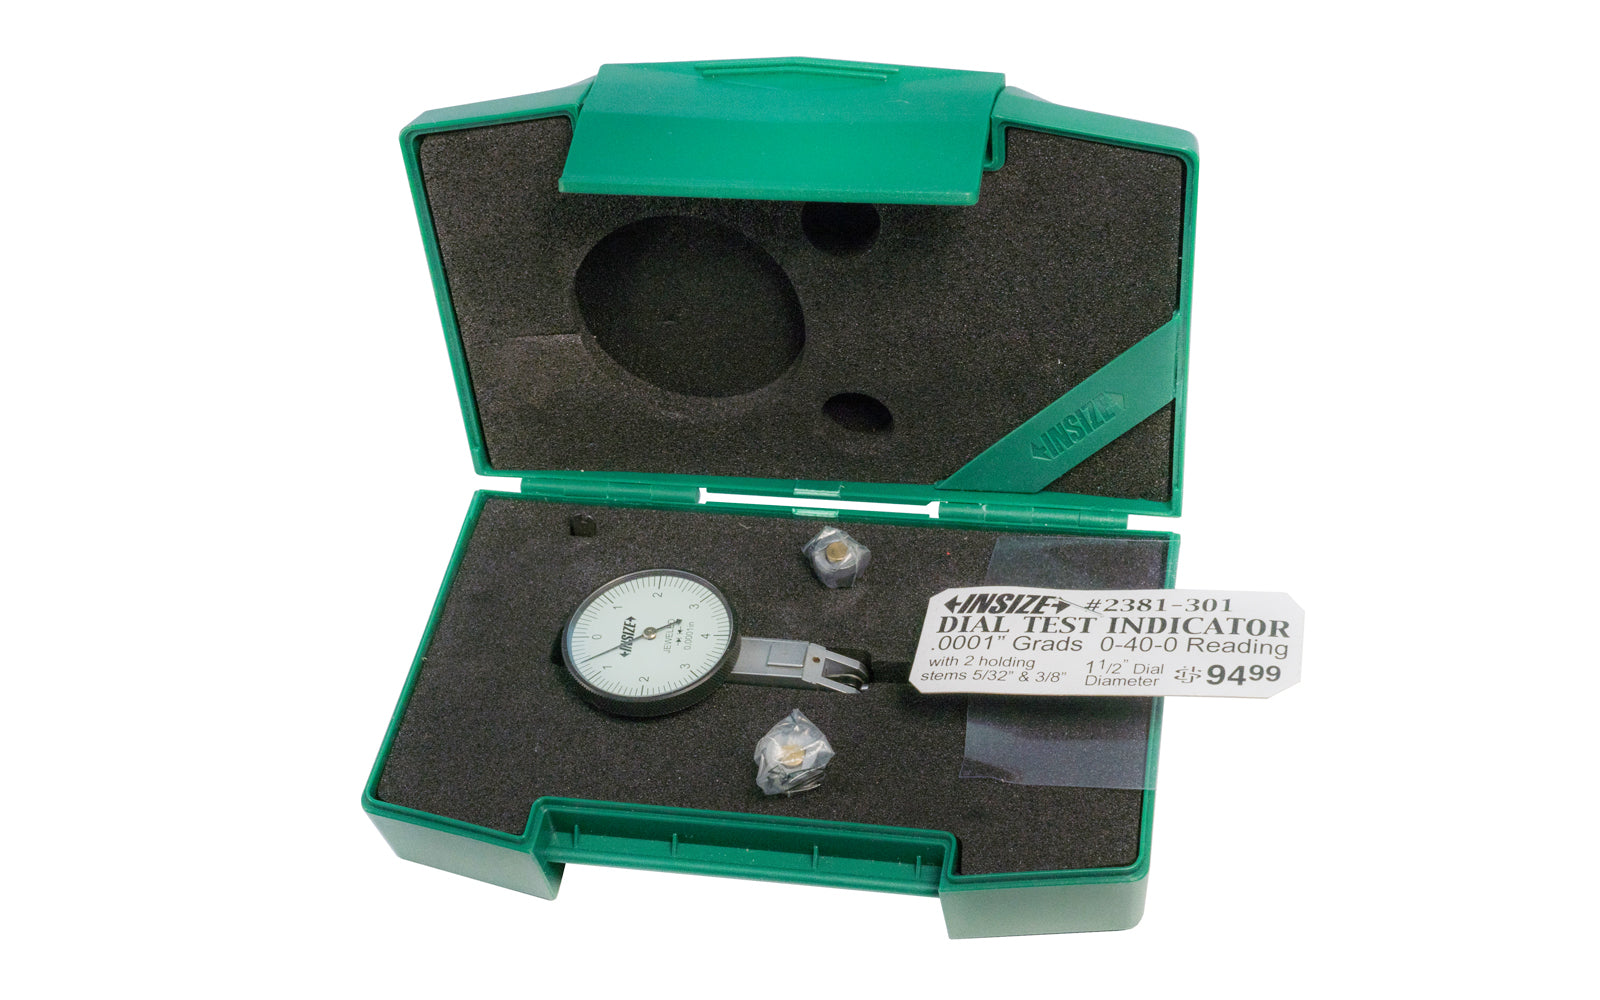 Insize Dial Test Indicator. 0.0001" Grads. 1-1/2" dial diameter. With two holding stems 5/32" & 3/8". Insize Model 2381-301.